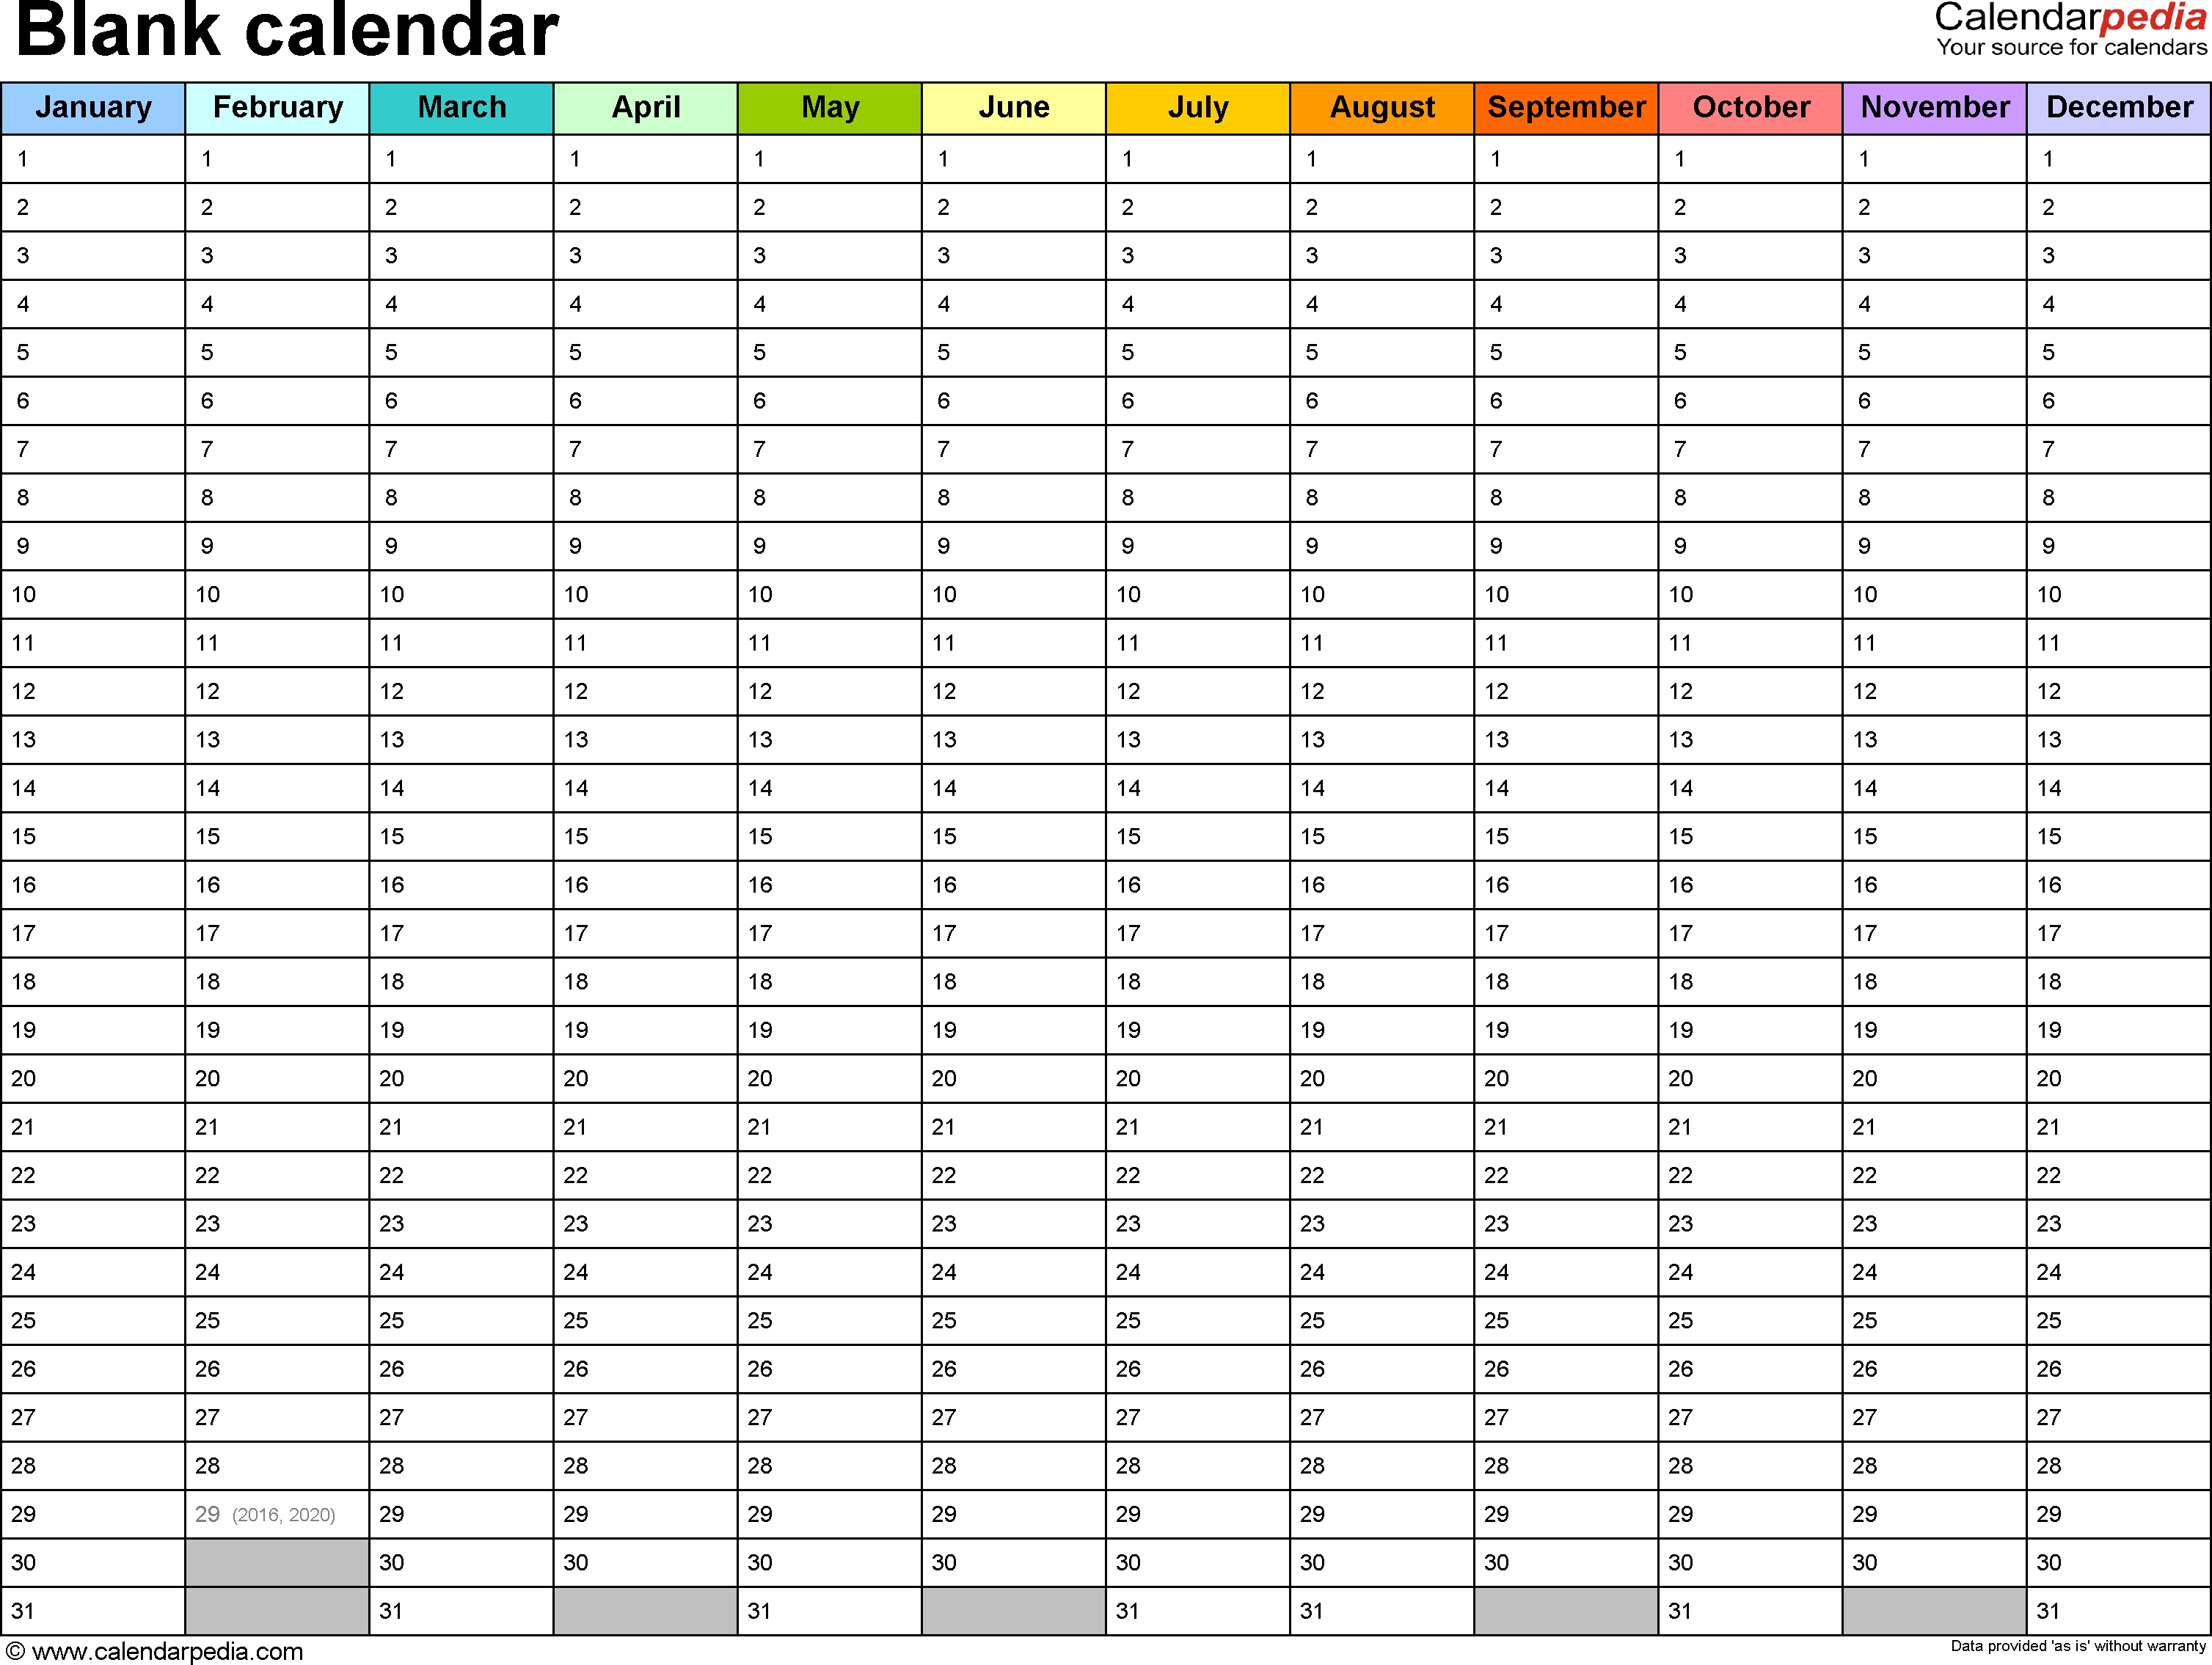 Blank Calendars - Free Printable Microsoft Excel Templates Exceptional Month At A Glance Blank Calendar